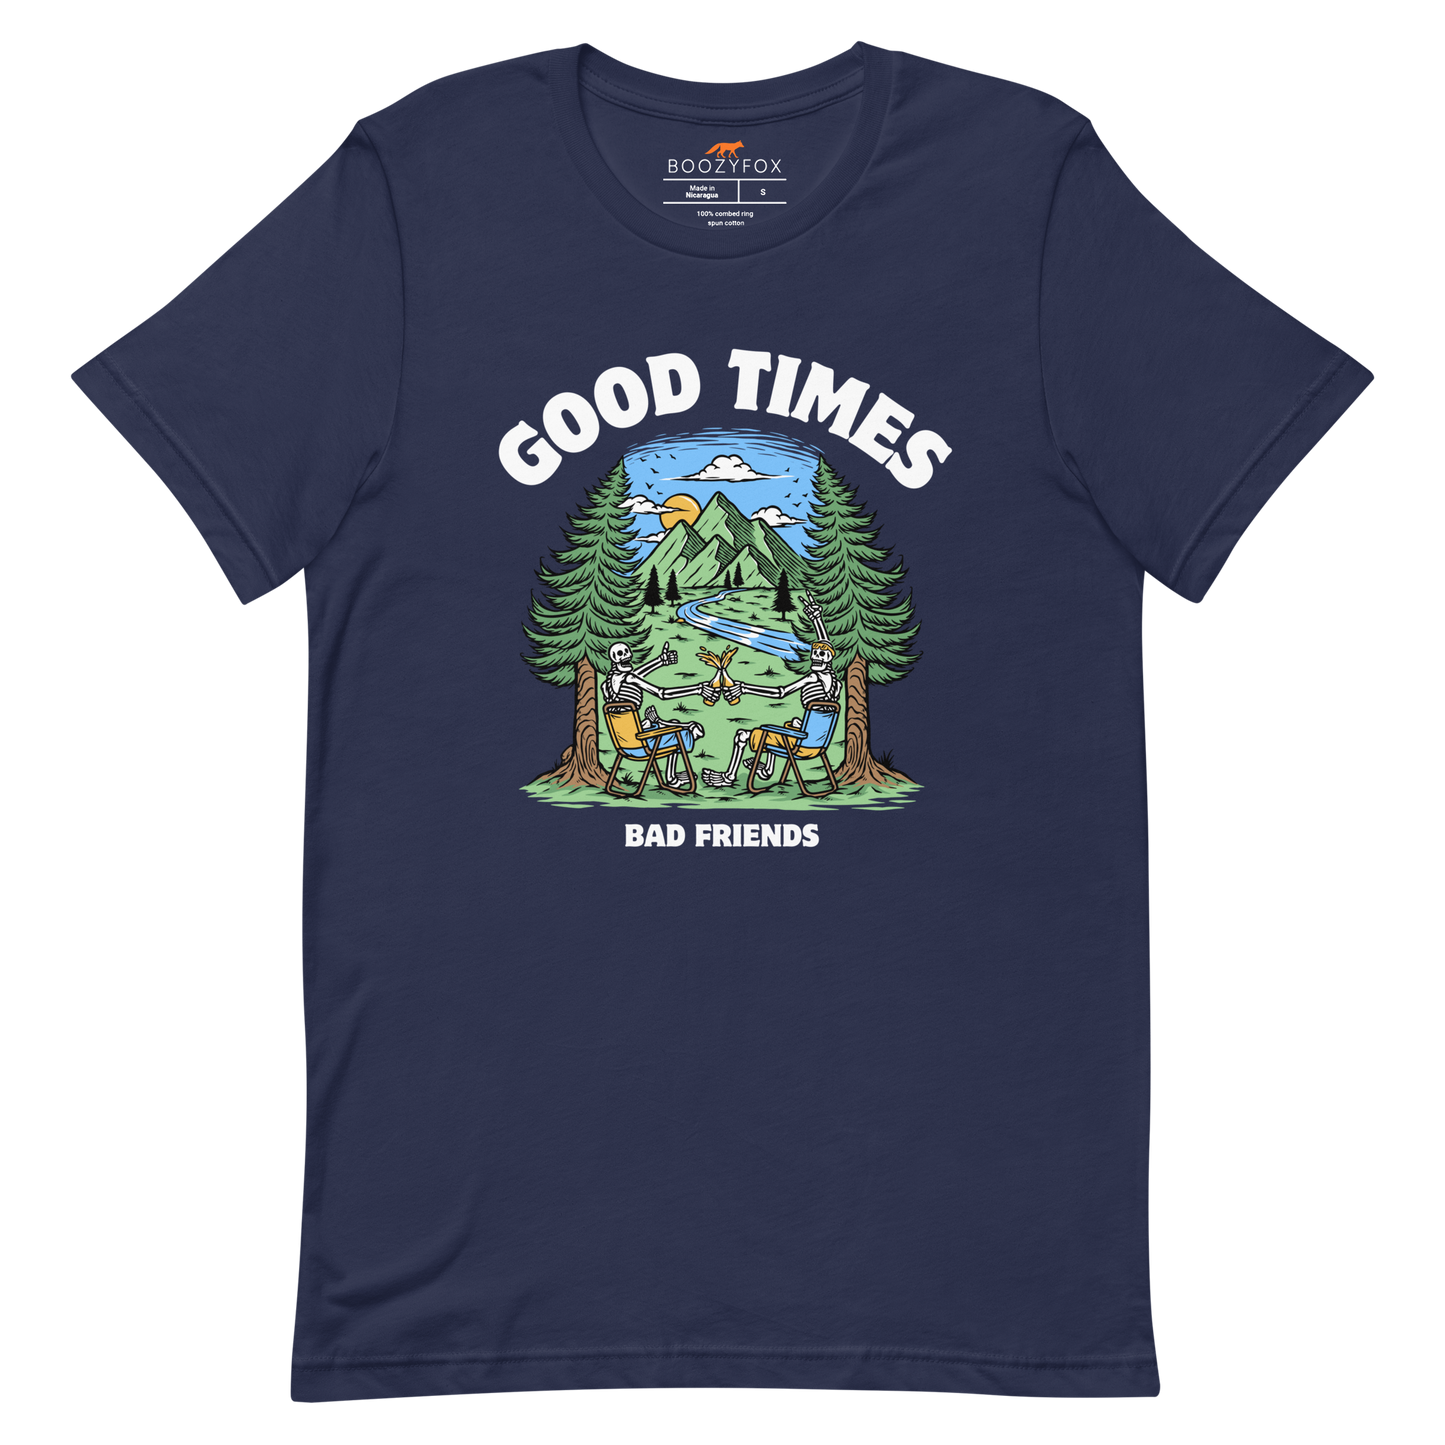 Navy Premium Good Times Bad Friends Tee featuring a lively graphic of friends enjoying a beer in nature - Funny Graphic Nature Tees - Boozy Fox